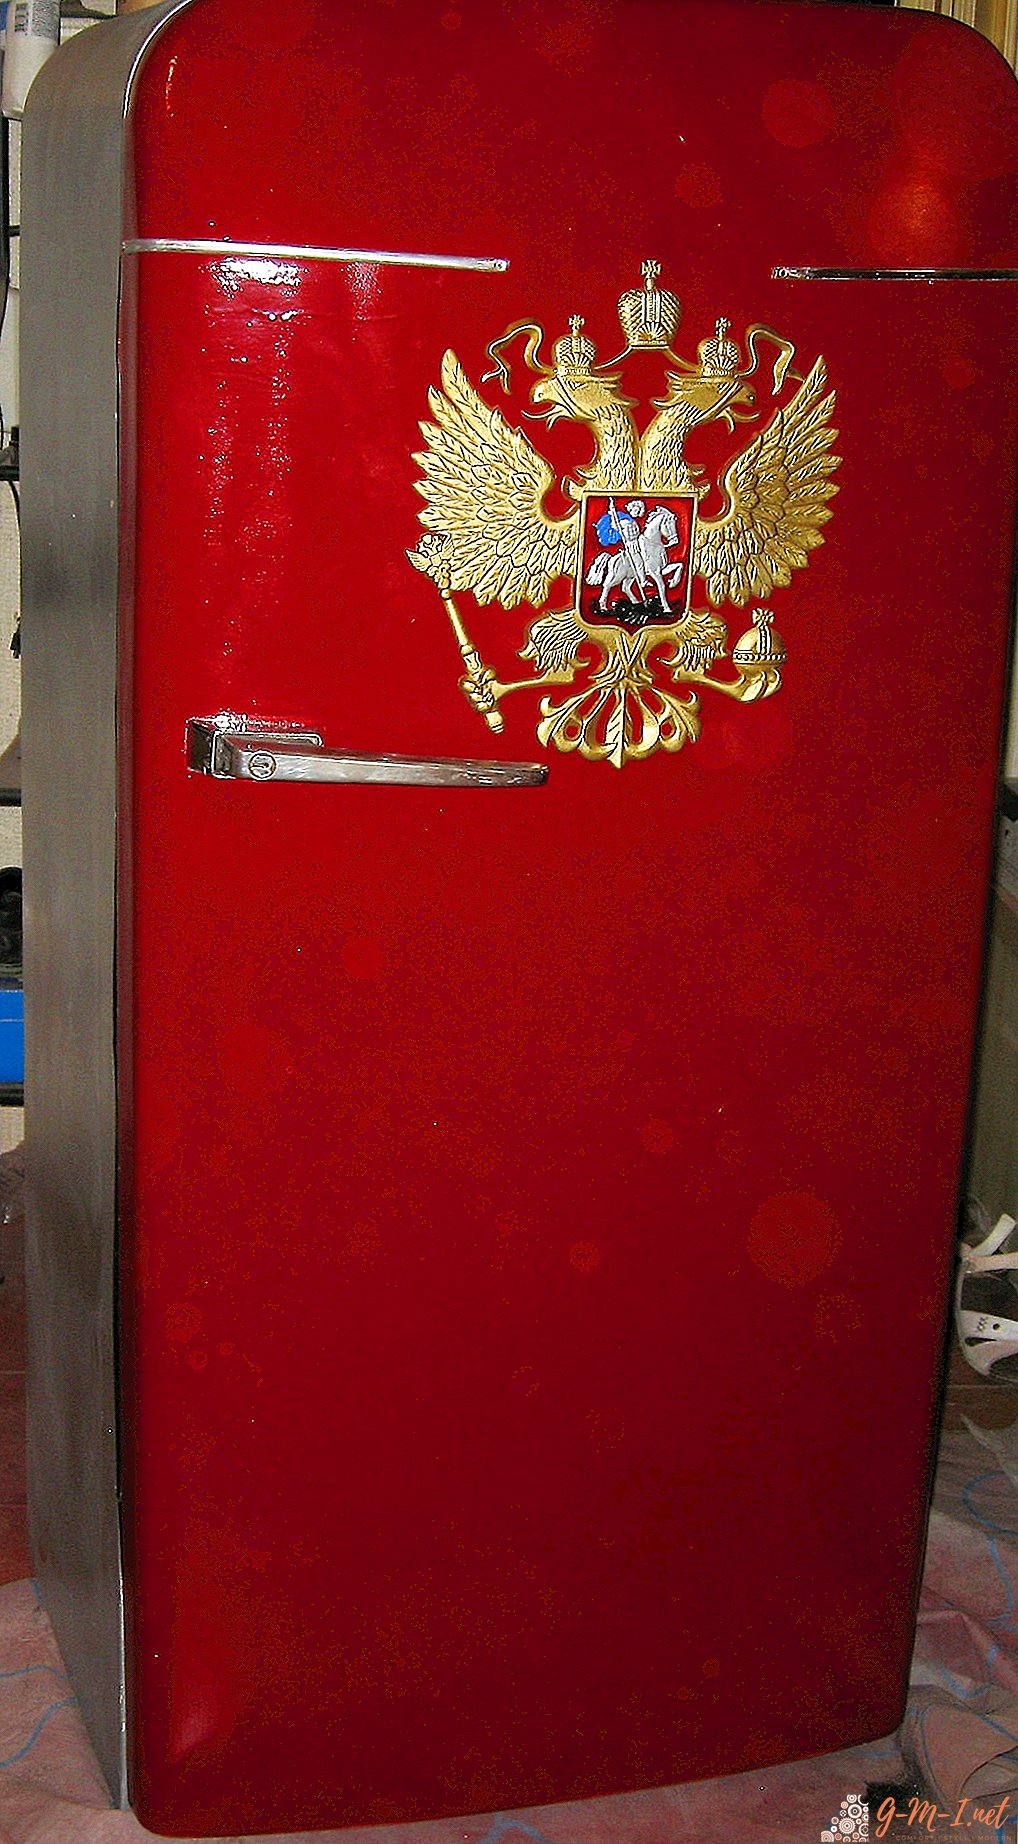 Soviet means reliable: how the ZIL refrigerator saved Fidel Castro